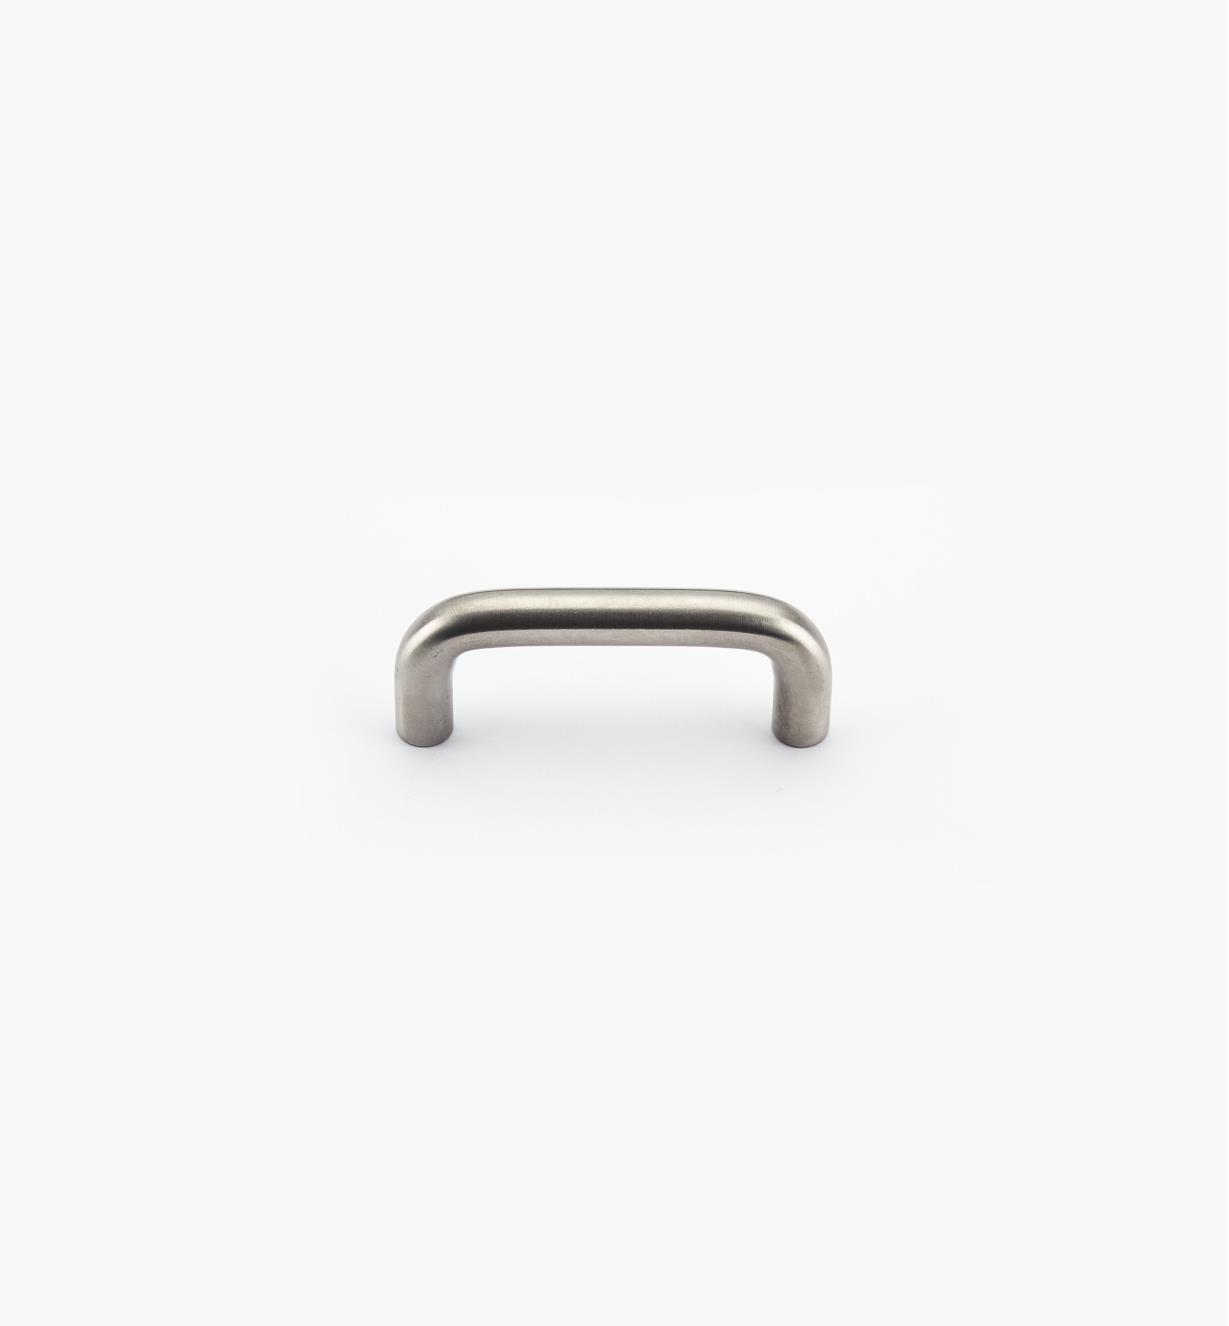 01W6853 - 10mm x 64mm Stainless-Steel Wire Pull